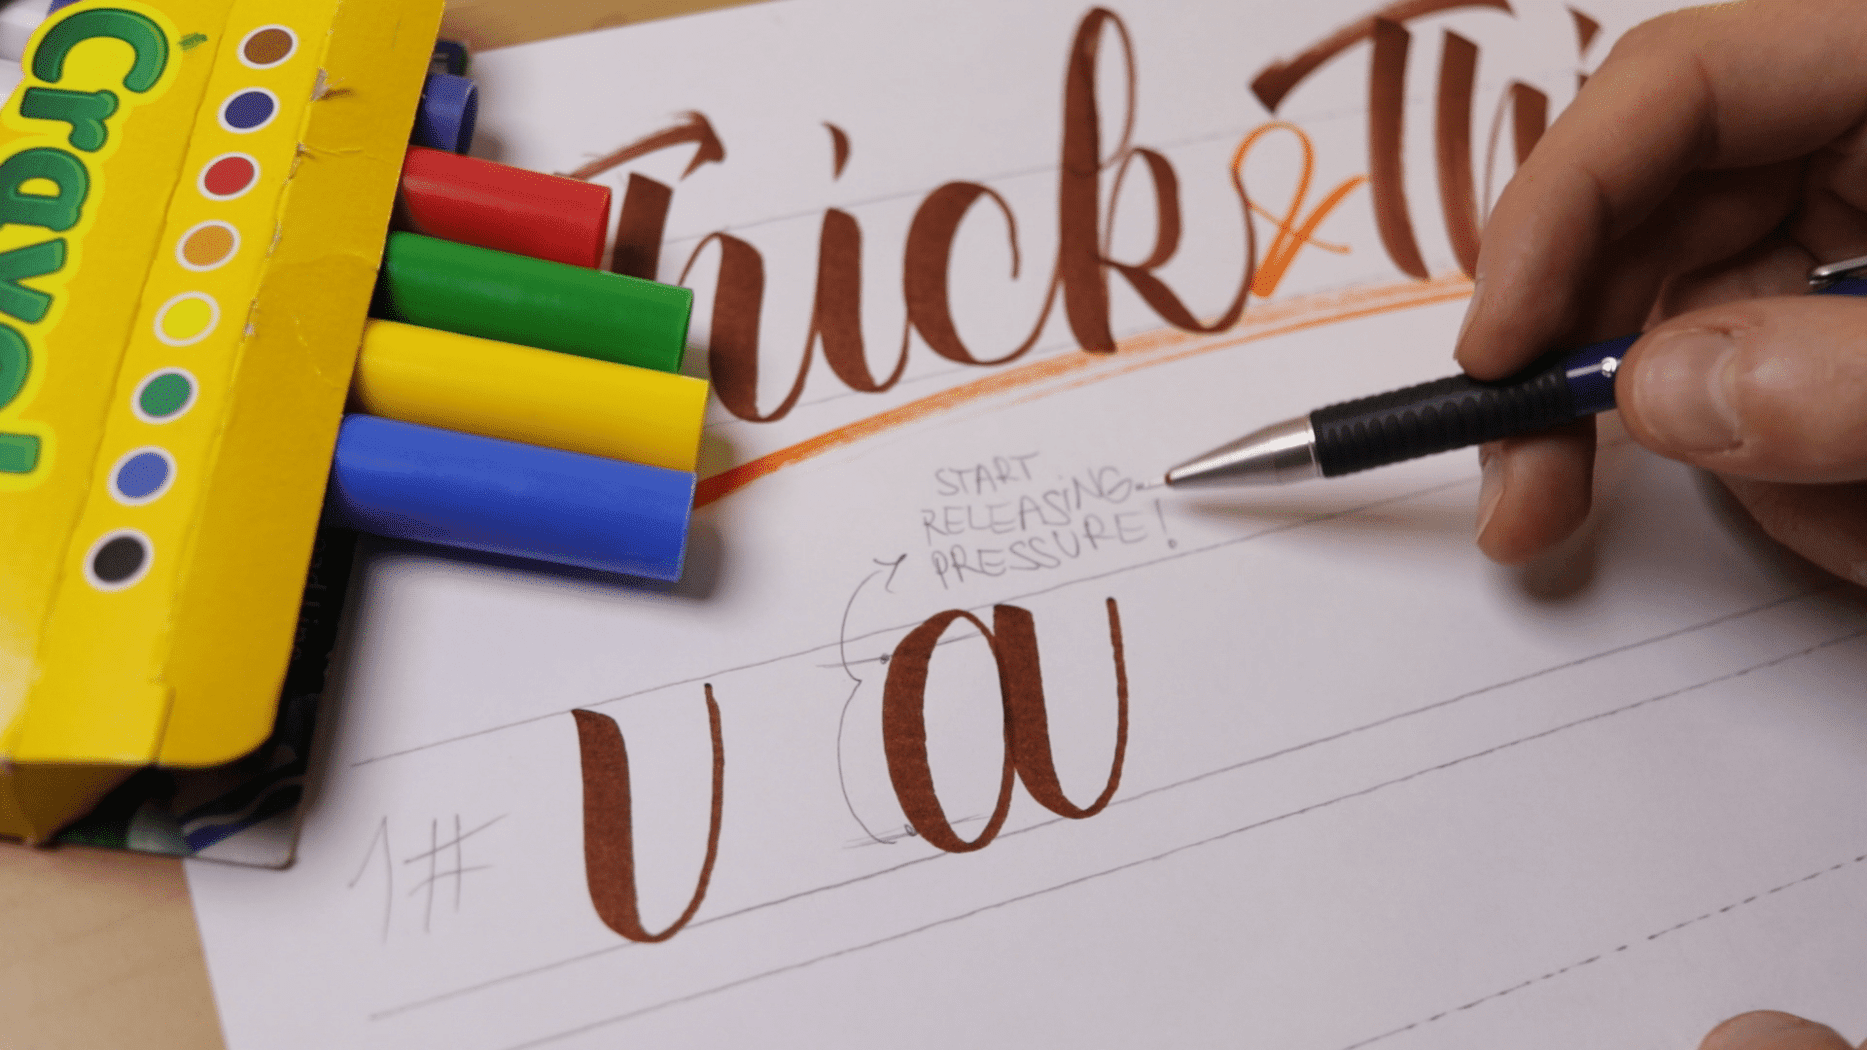 Crayola Calligraphy Tutorial  Easy (and Cheap!) Hand Lettering For  Beginners Using Crayola Markers 